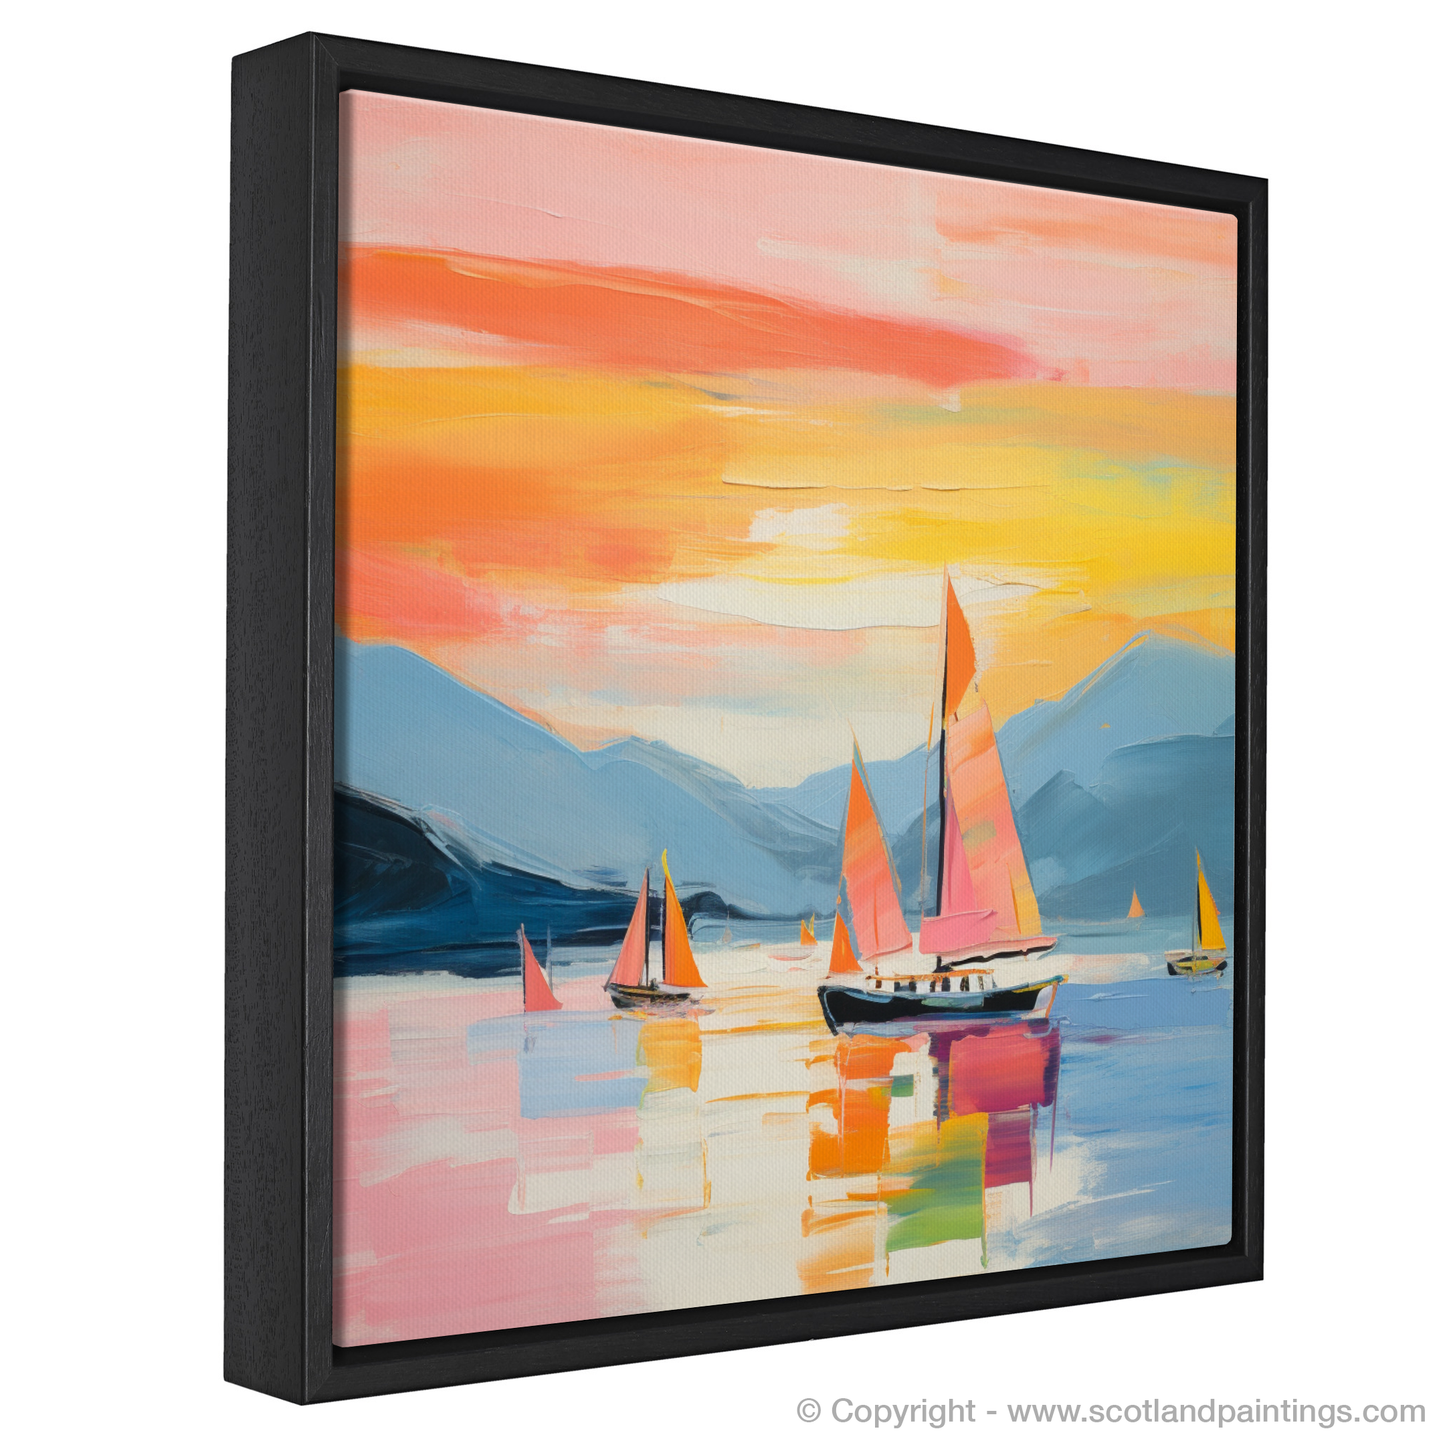 Painting and Art Print of Sailing boats on Loch Lomond at sunset entitled "Sailing into Sunset Serenity on Loch Lomond".